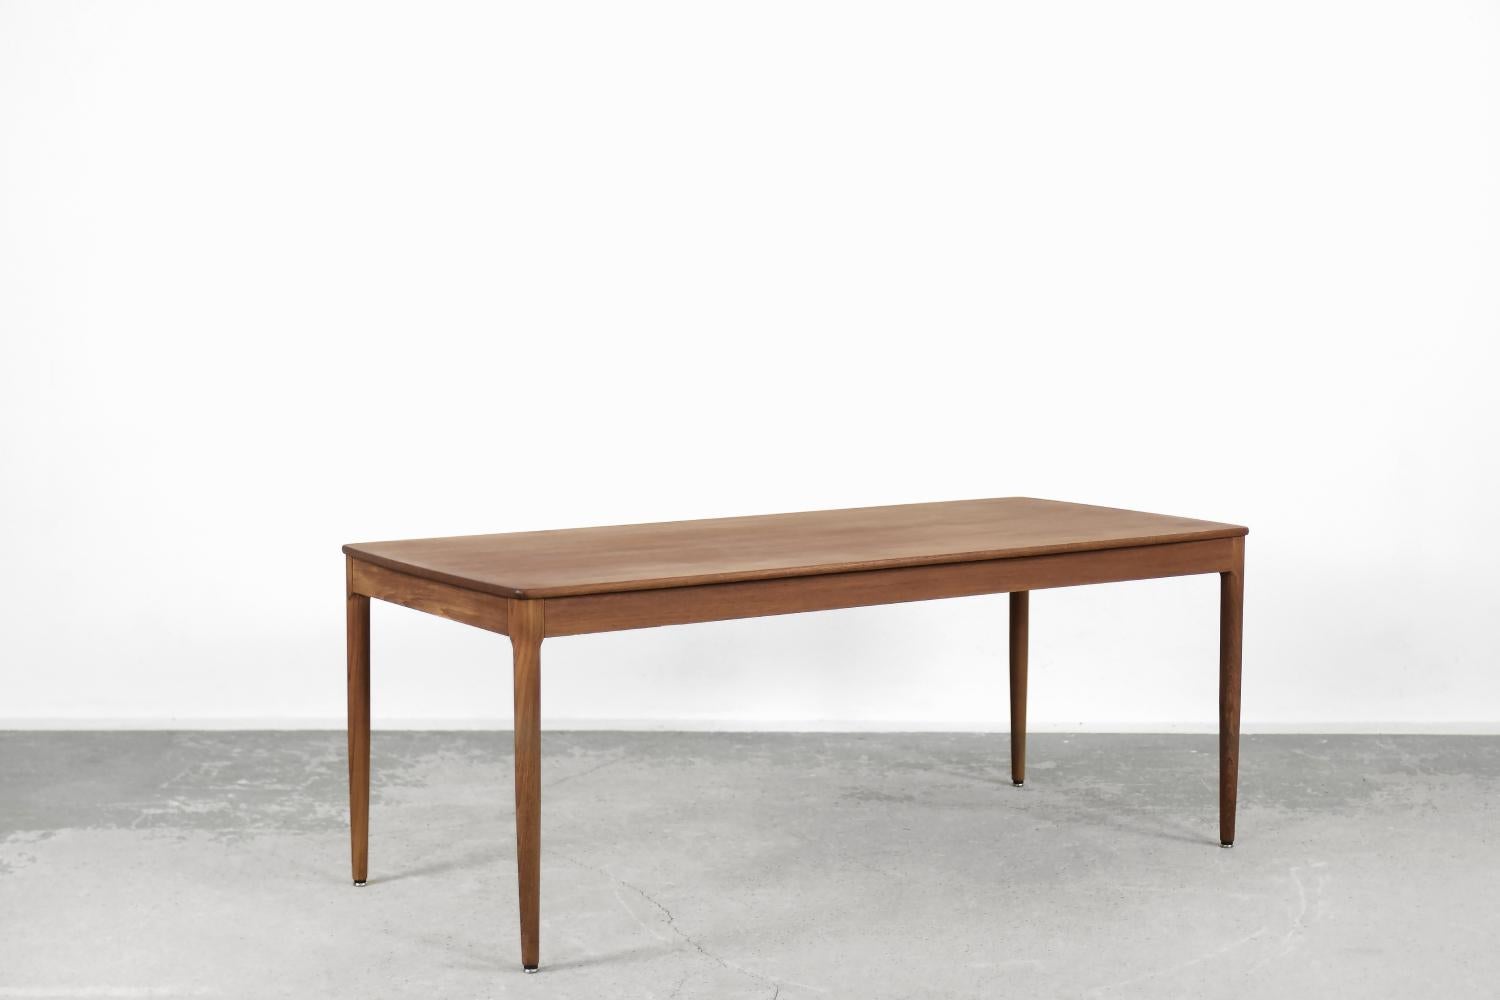 This modernist coffee table was designed by Yngvar Sandström for the Swedish AB Seffle Möbelfabrik manufacture during the 1960s. It is made of high-quality teak wood, which is extremely resistant to external factors, and owes its longevity mainly to